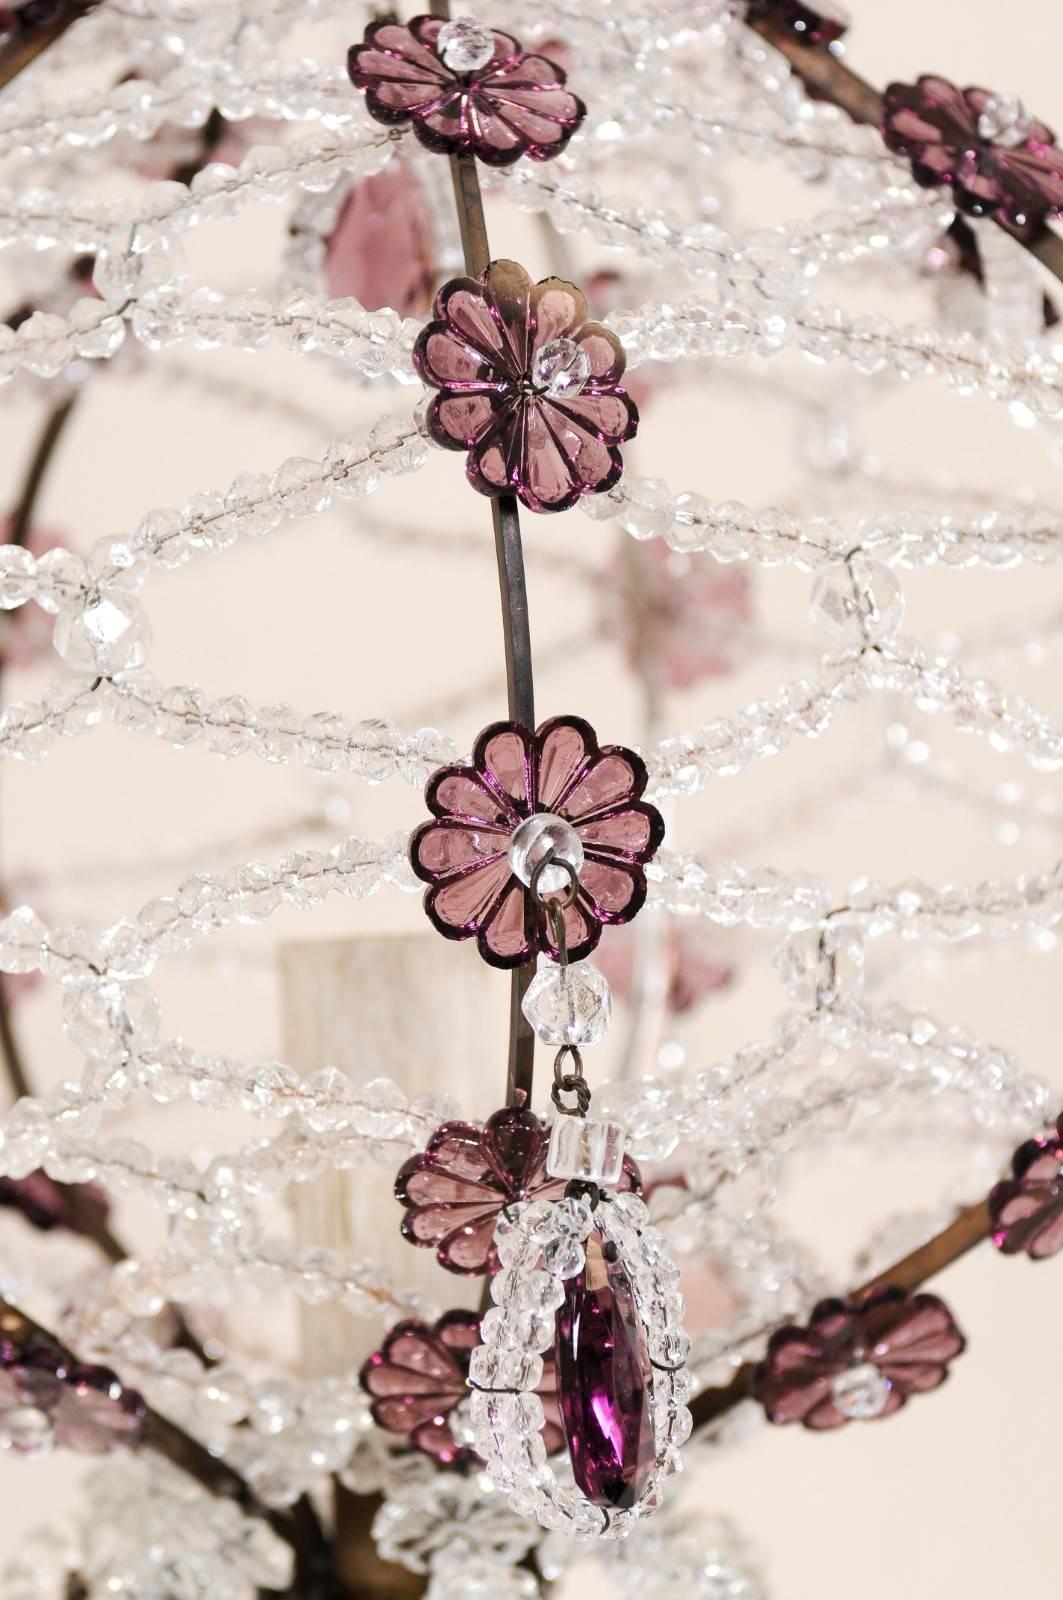 Metal Italian Balloon-Shaped Chandelier Pendant w/Clear & Amethyst Colored Crystals For Sale